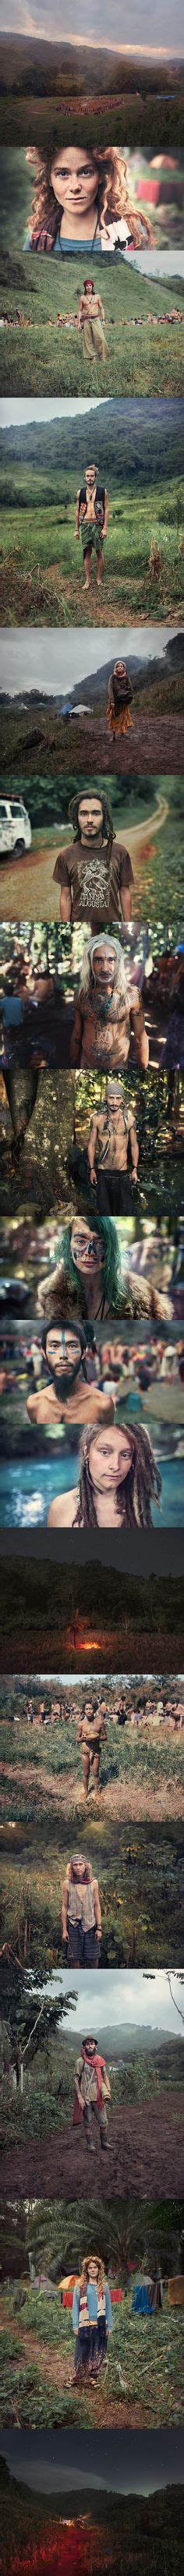 People Of The Rainbow Gathering Rainbow Gathering And